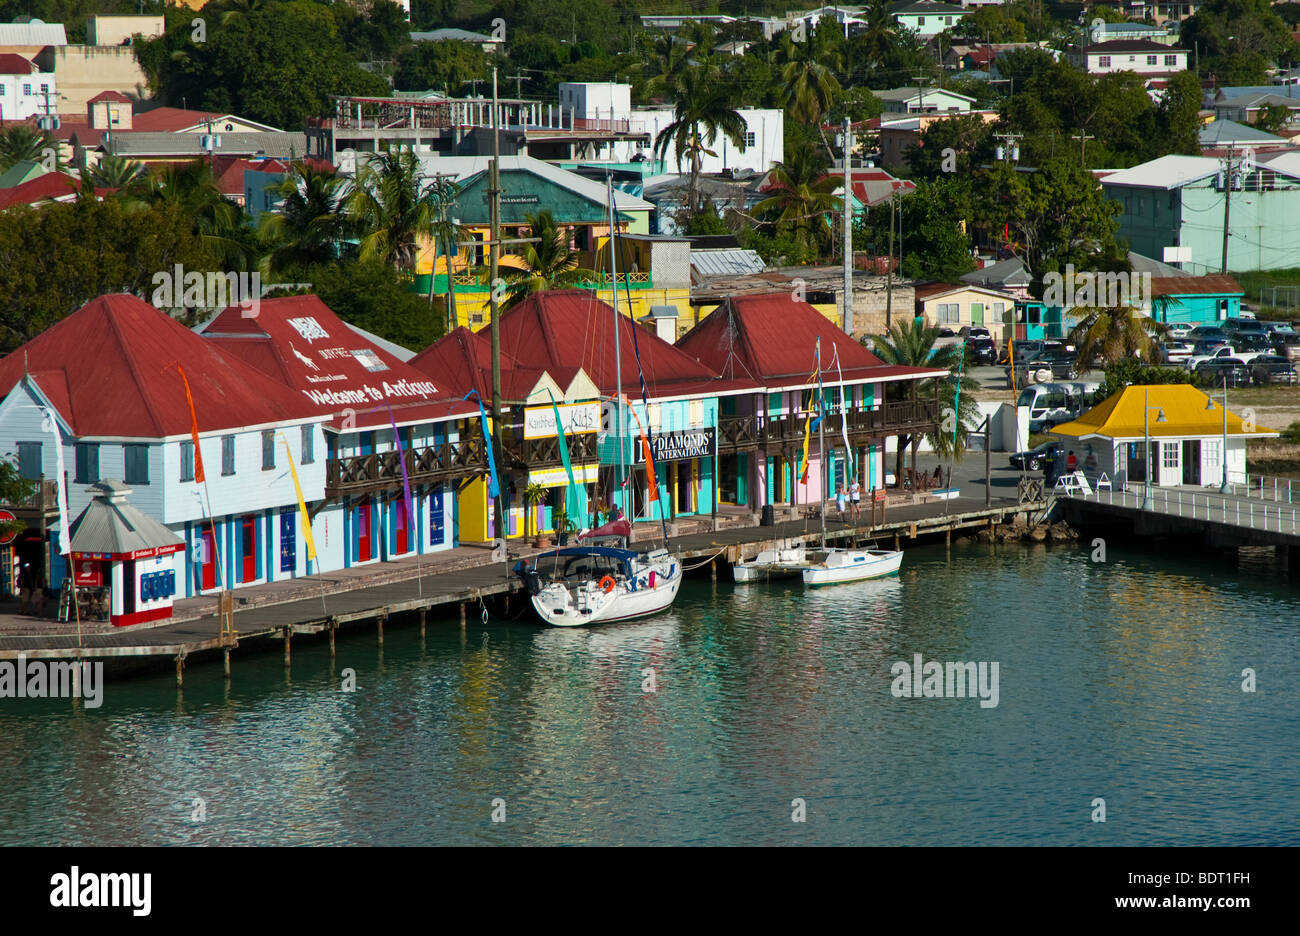 A view of the town and port area of St Johns in the Caribbean Island of Antigua Stock Photo